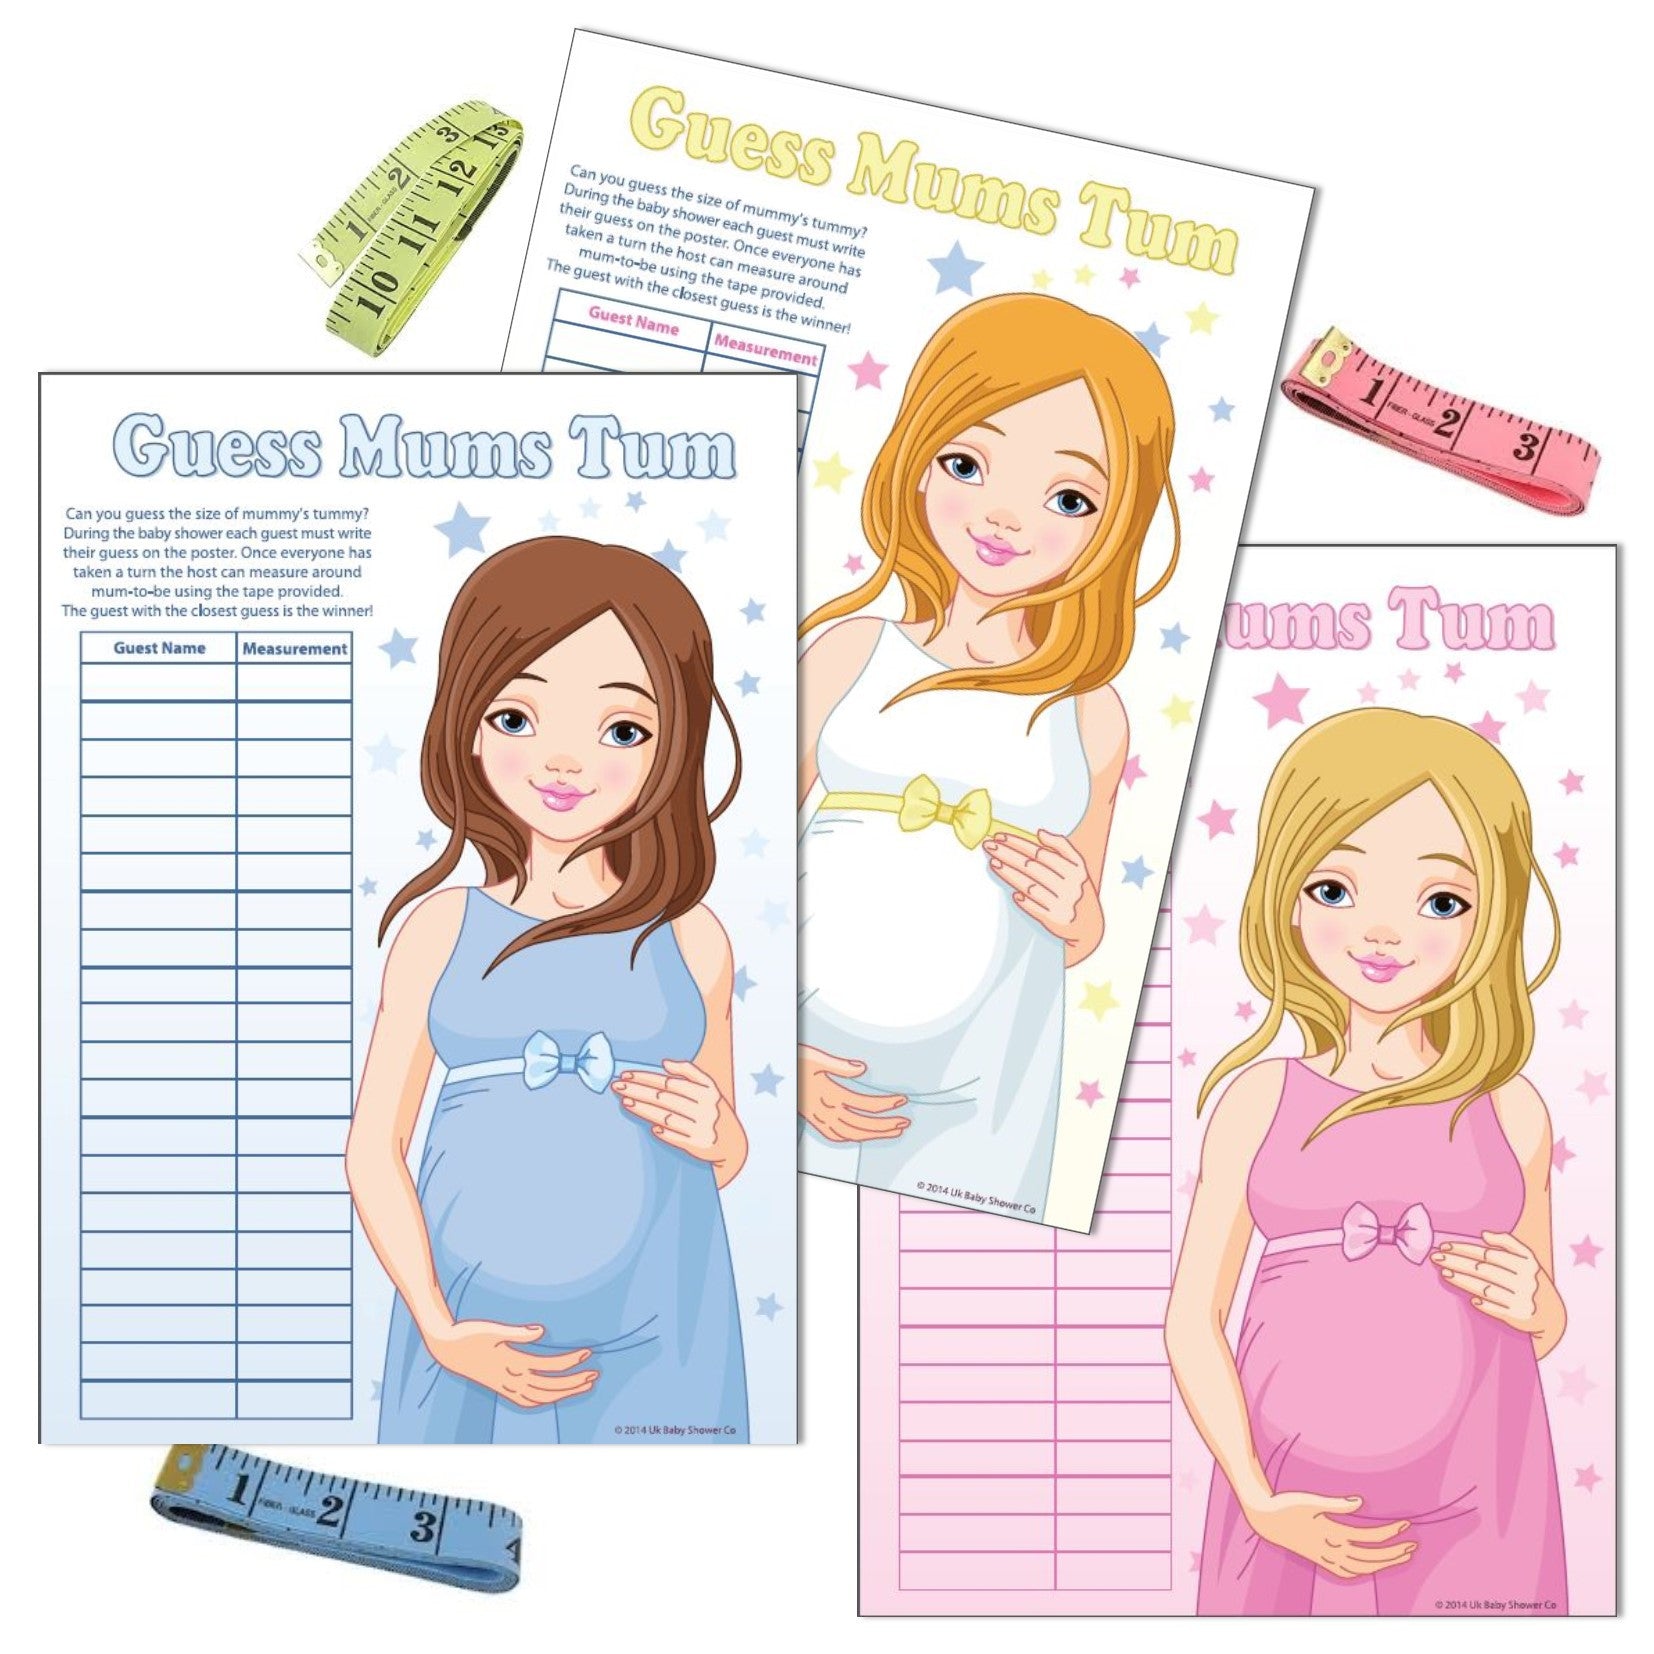 Stars Guess Mums Tum Party Game,[product type] - Baby Showers and More